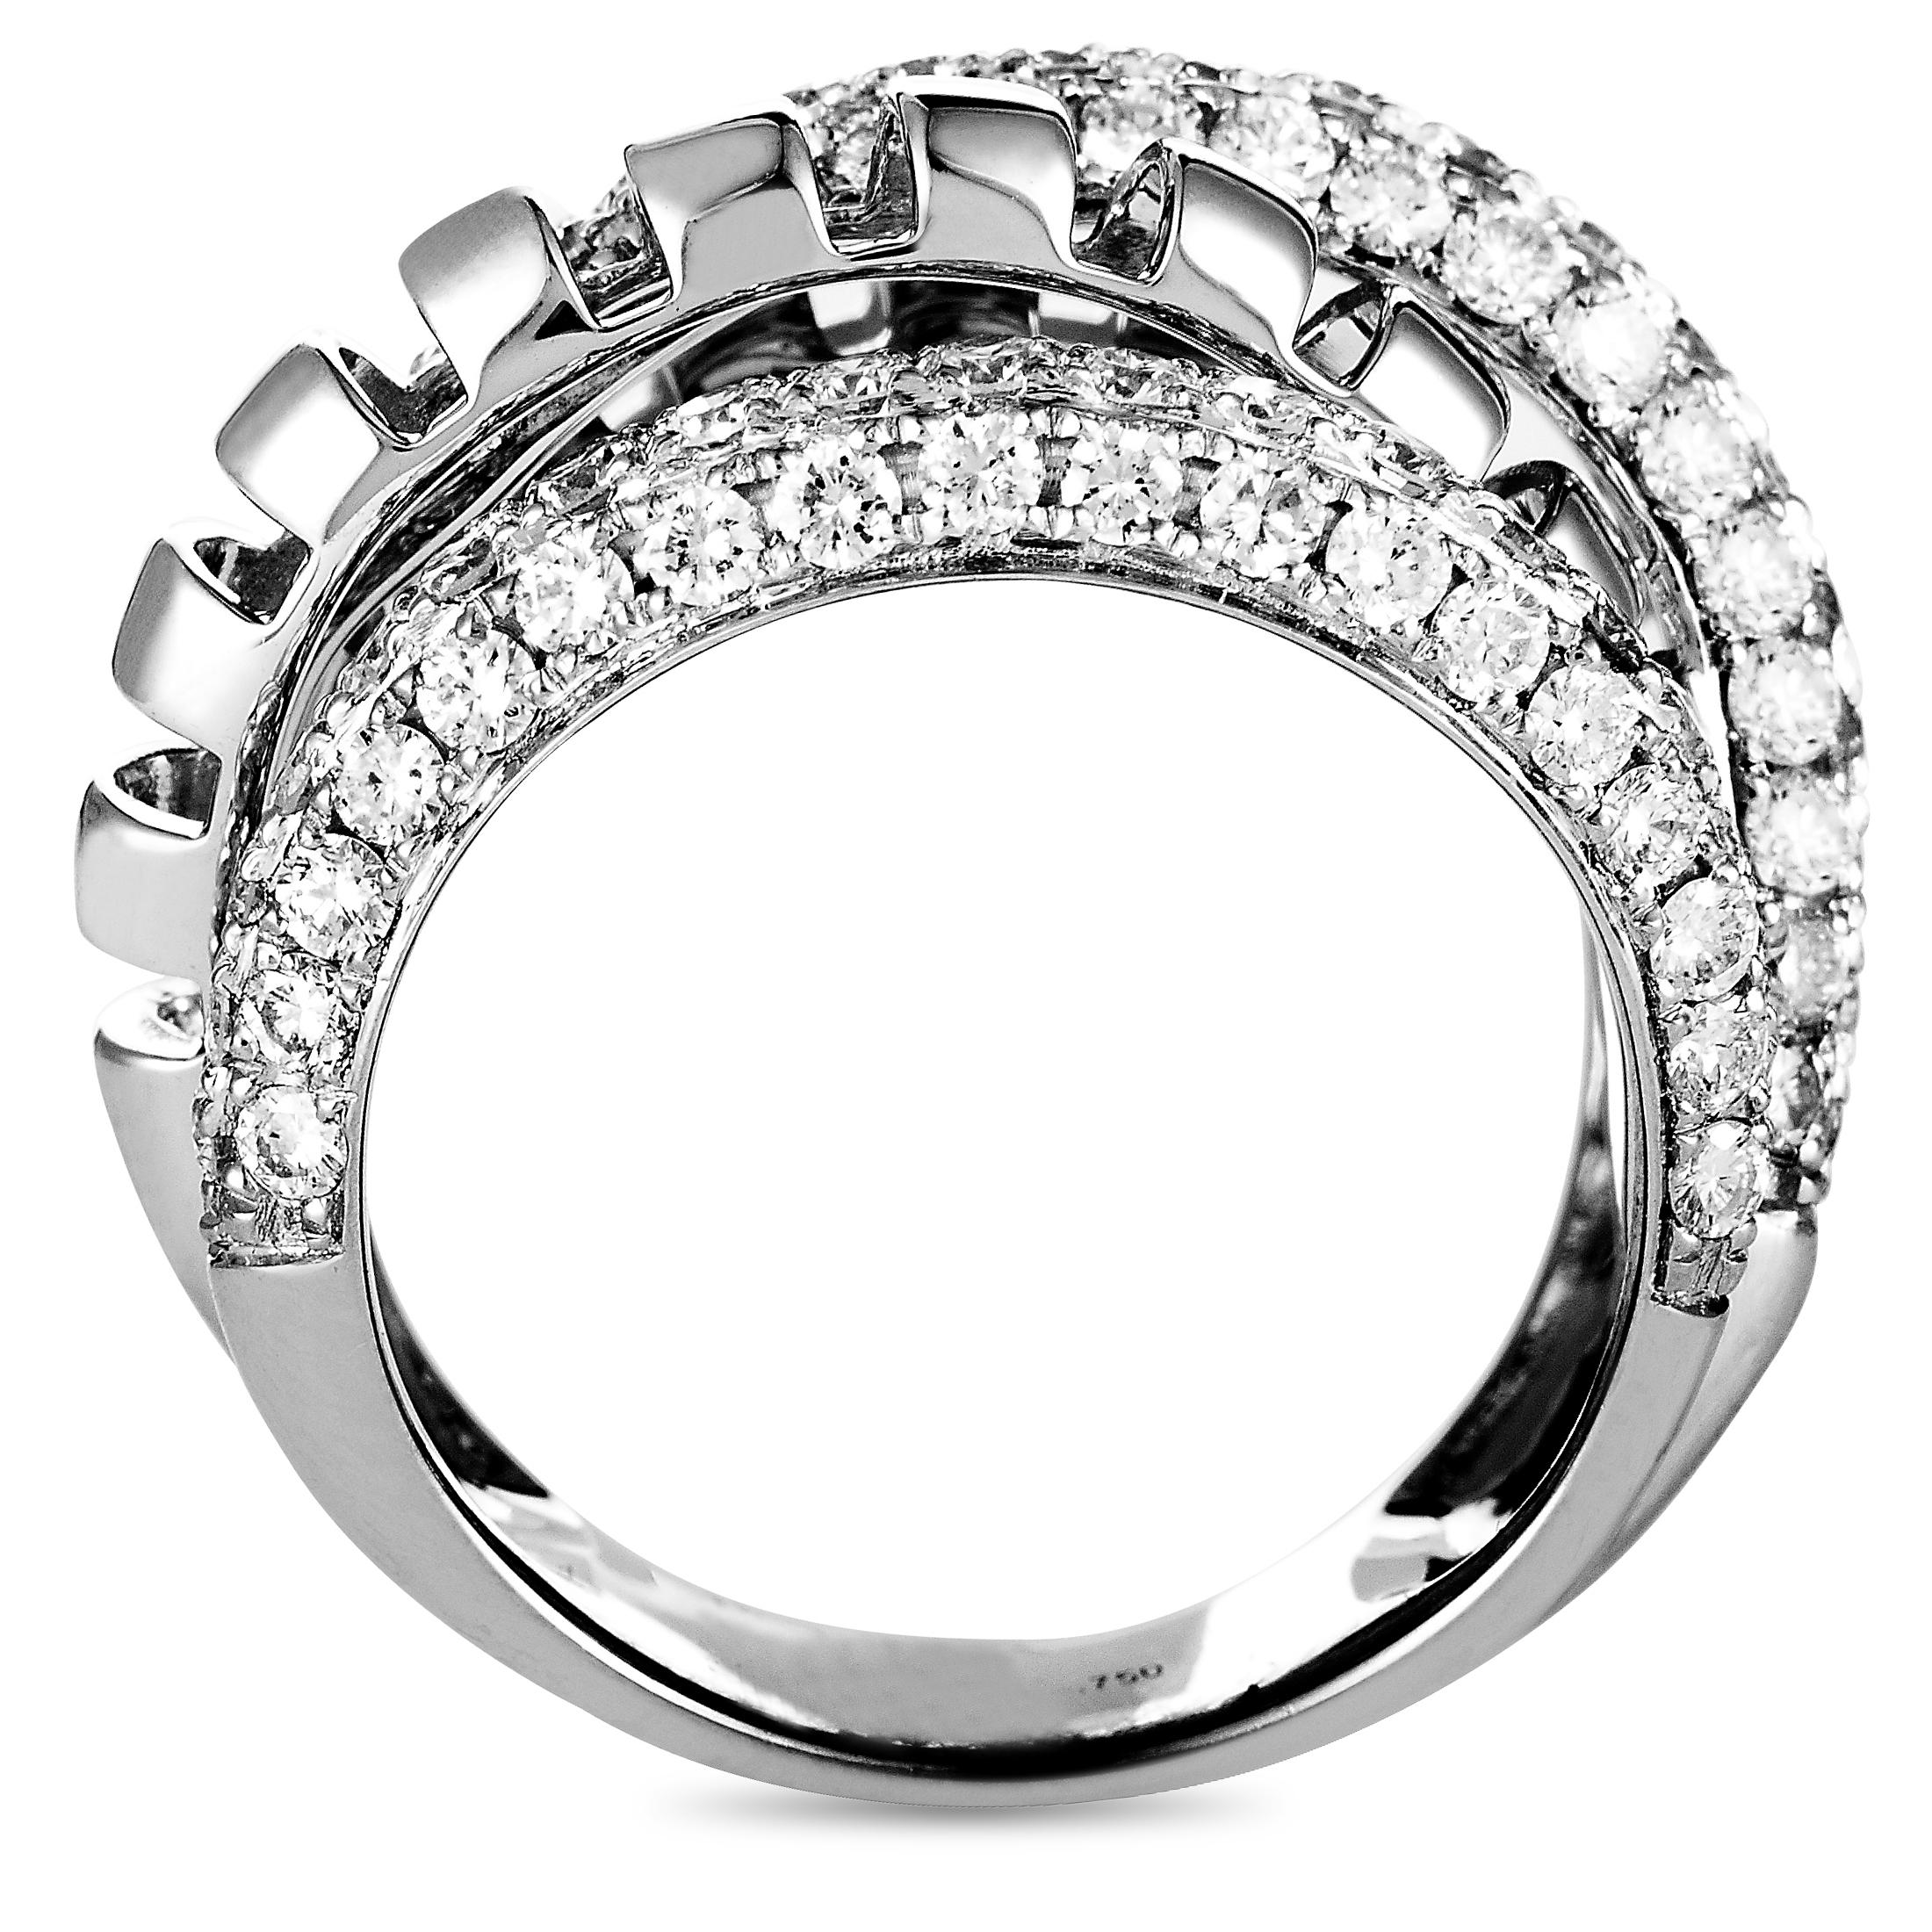 This LB Exclusive ring is crafted from 18K white gold and weighs 9.2 grams, boasting a total of 2.10 carats of diamonds. Band thickness and ring top height measure 6 and 7 mm respectively, while ring top dimensions are 23 by 15 mm.

Offered in